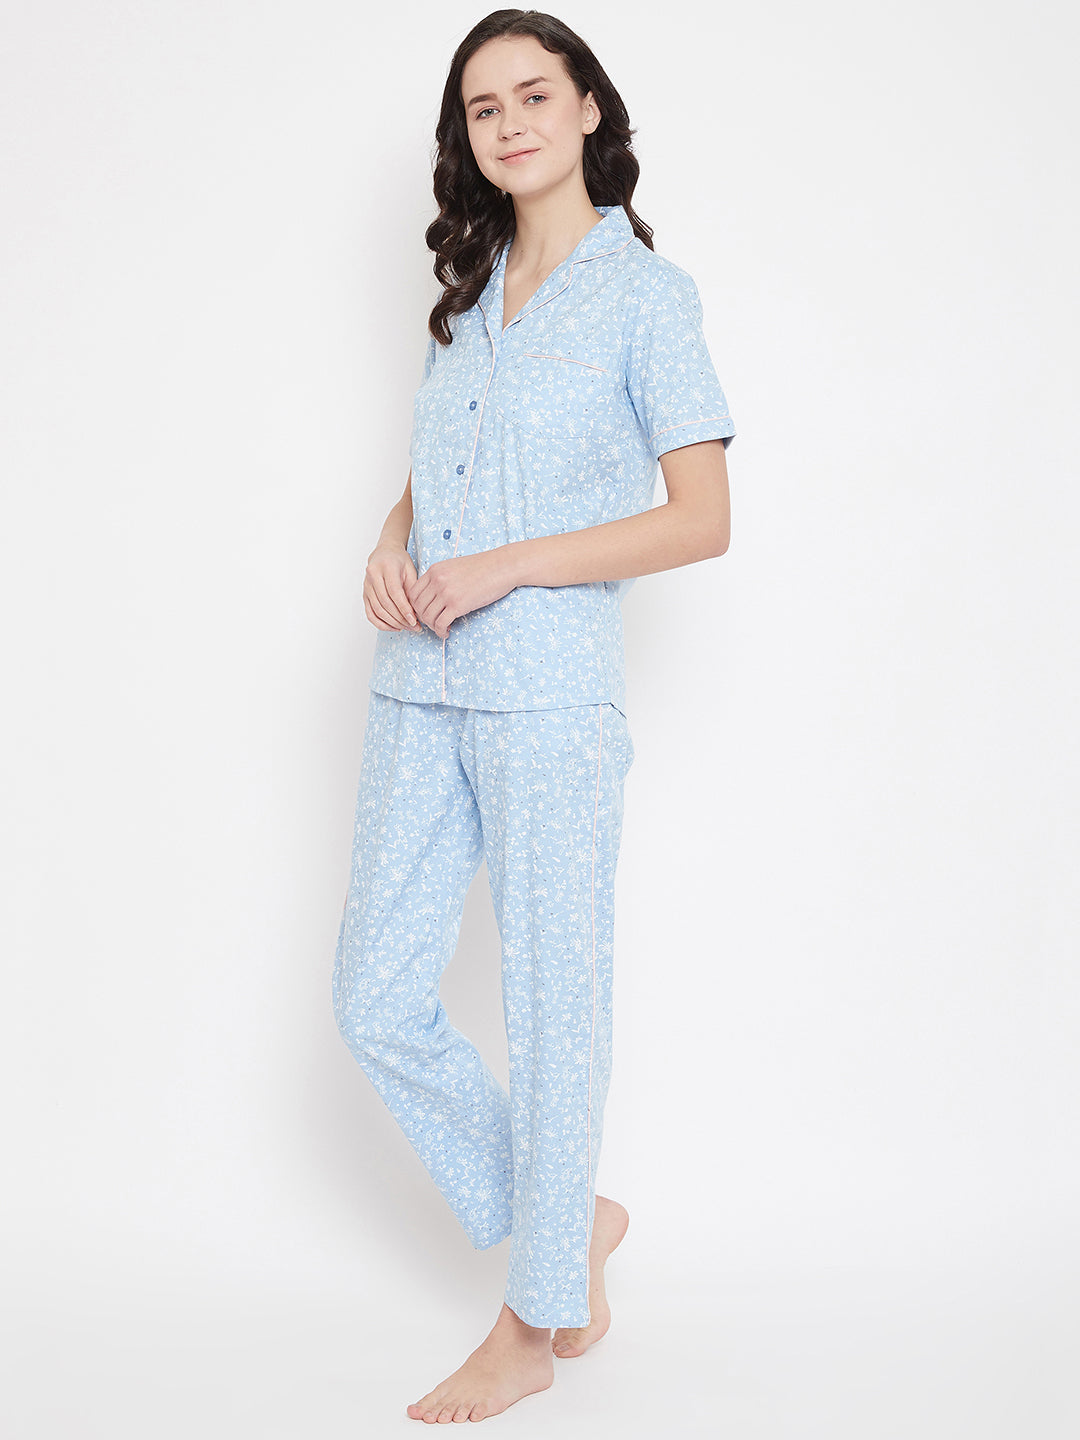 Blue Printed Slim Fit Night Suits - Women Night Suits